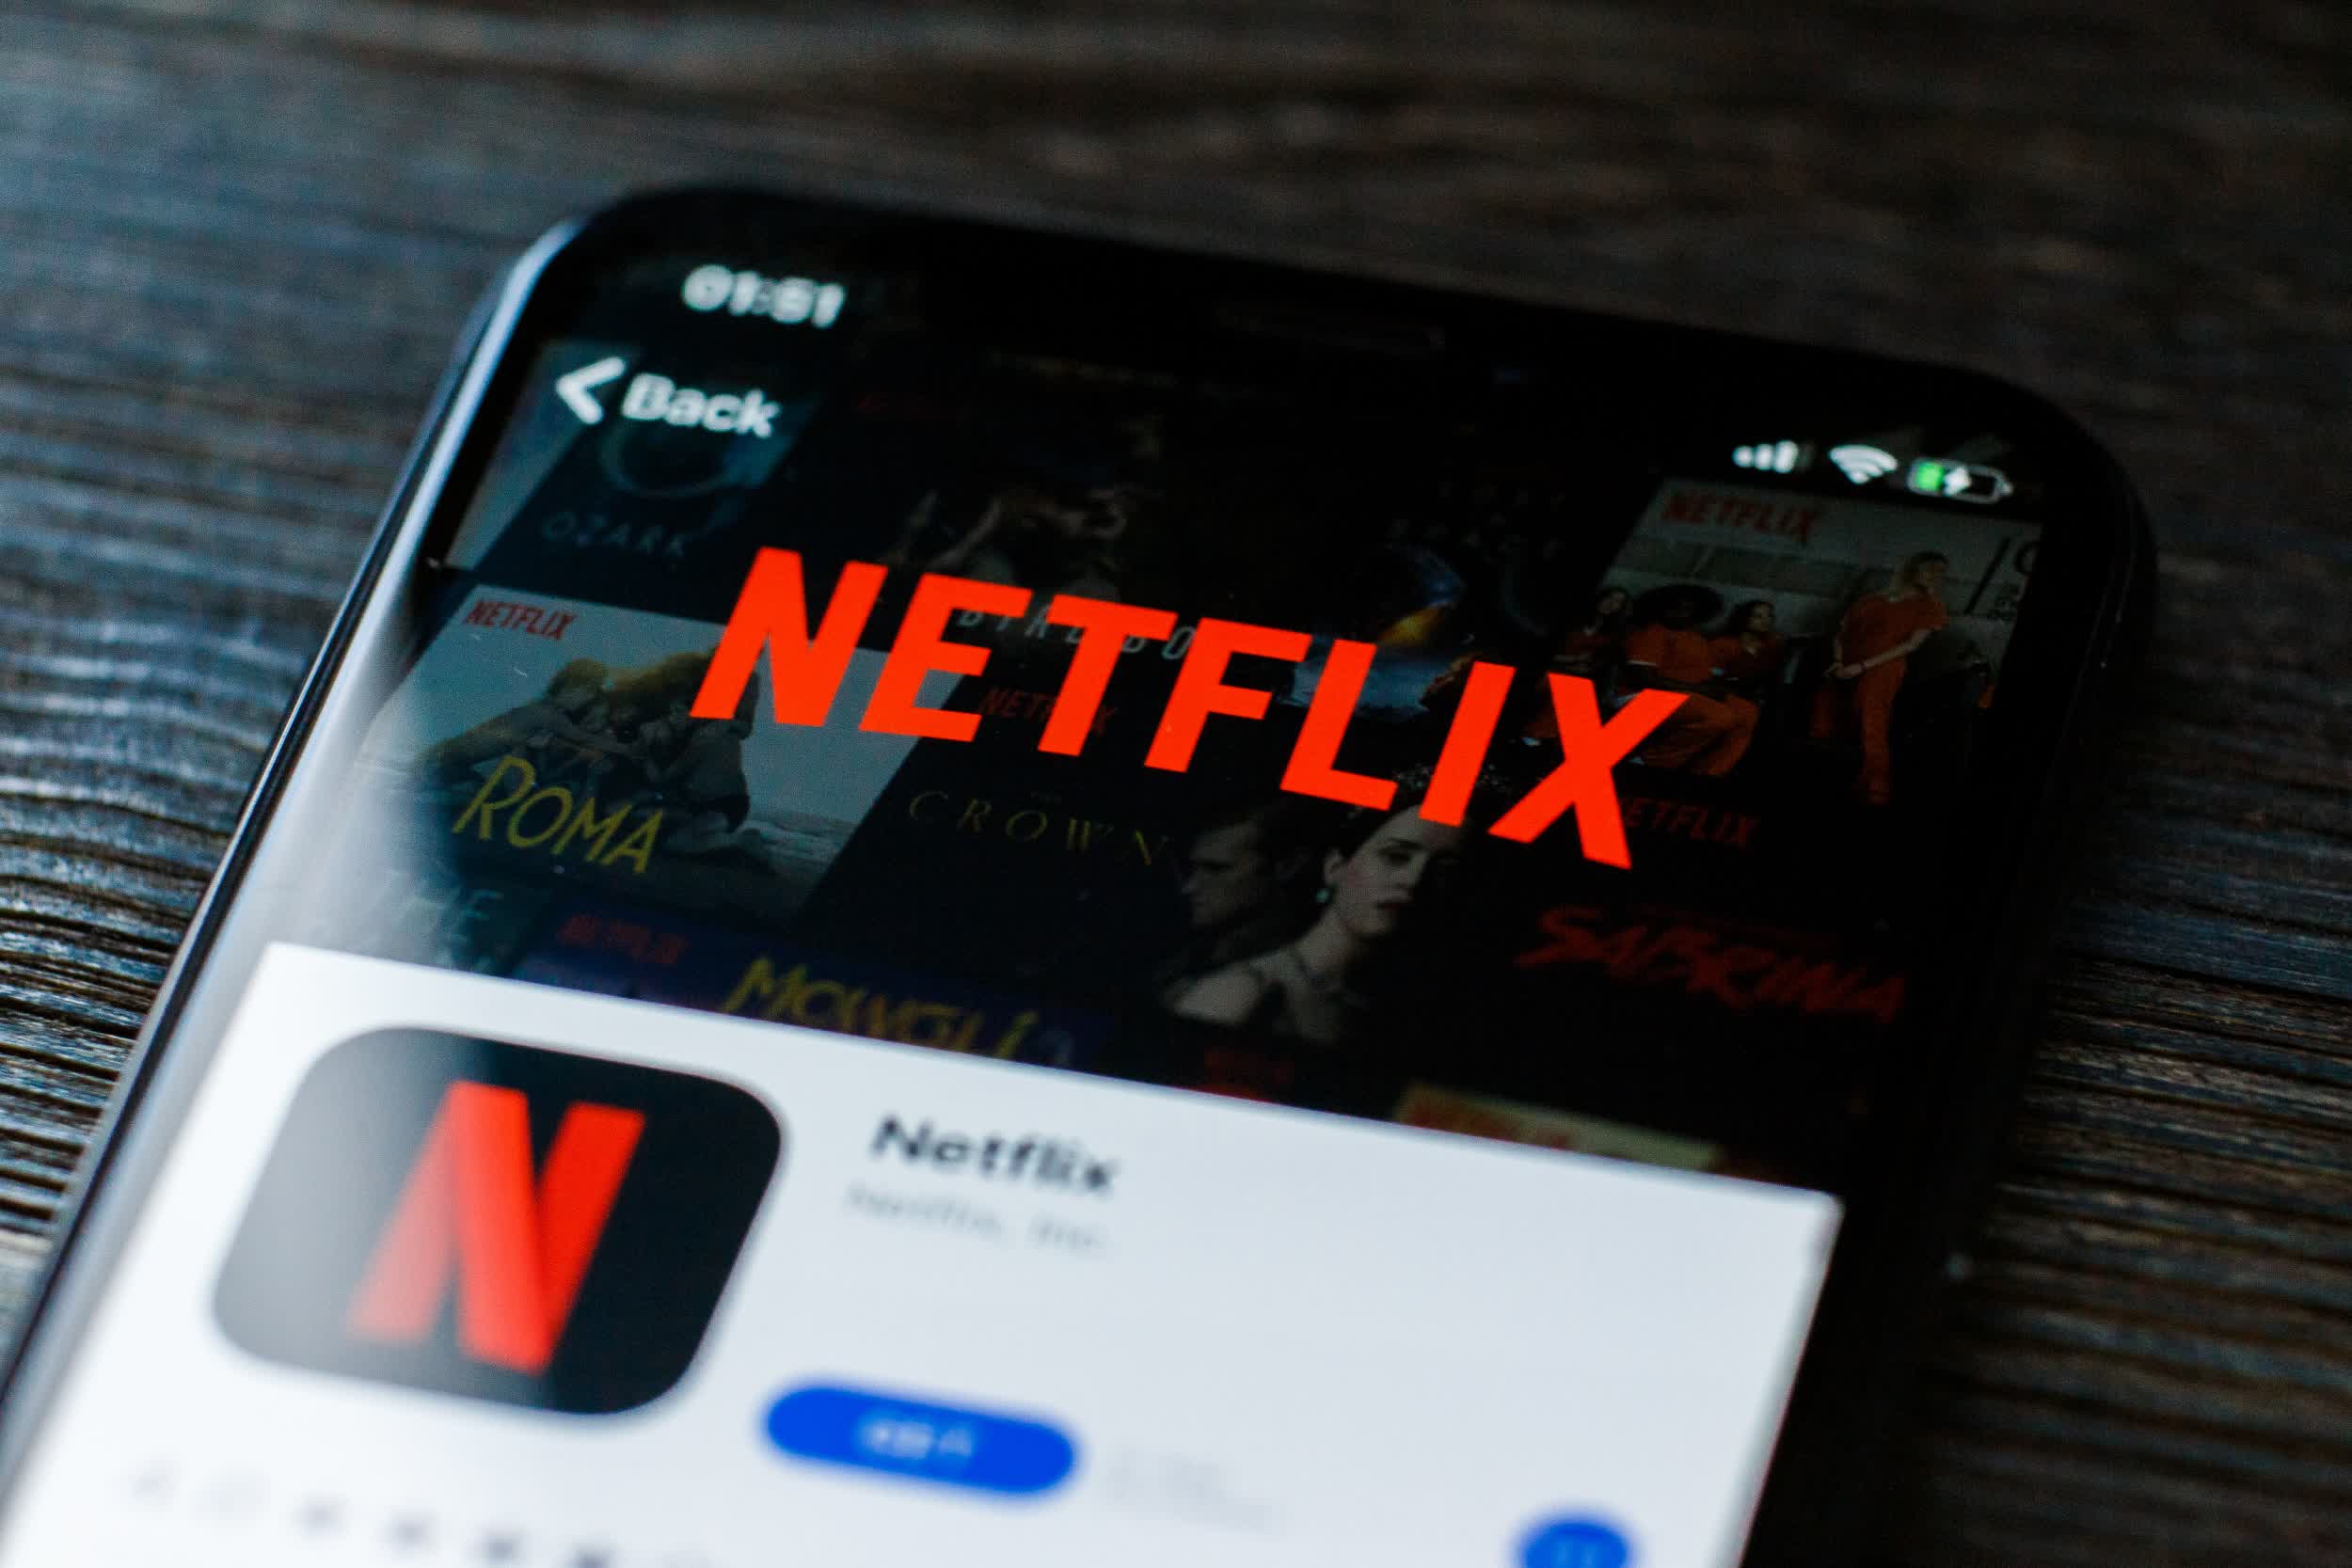 Netflix optimizes audio experience for Android users